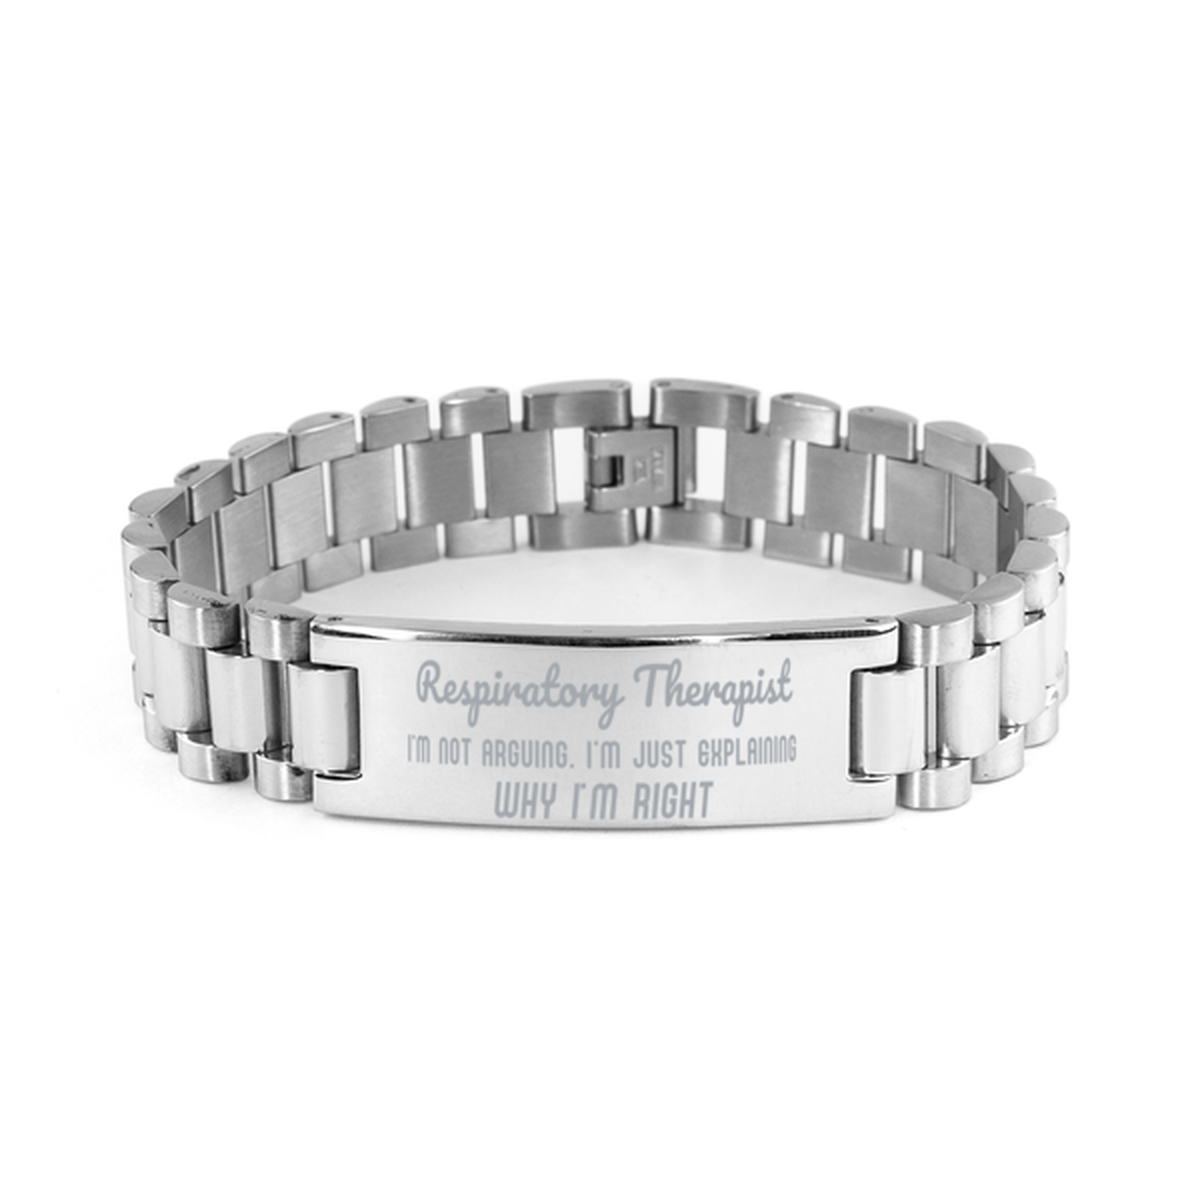 Respiratory Therapist I'm not Arguing. I'm Just Explaining Why I'm RIGHT Ladder Stainless Steel Bracelet, Graduation Birthday Christmas Respiratory Therapist Gifts For Respiratory Therapist Funny Saying Quote Present for Men Women Coworker